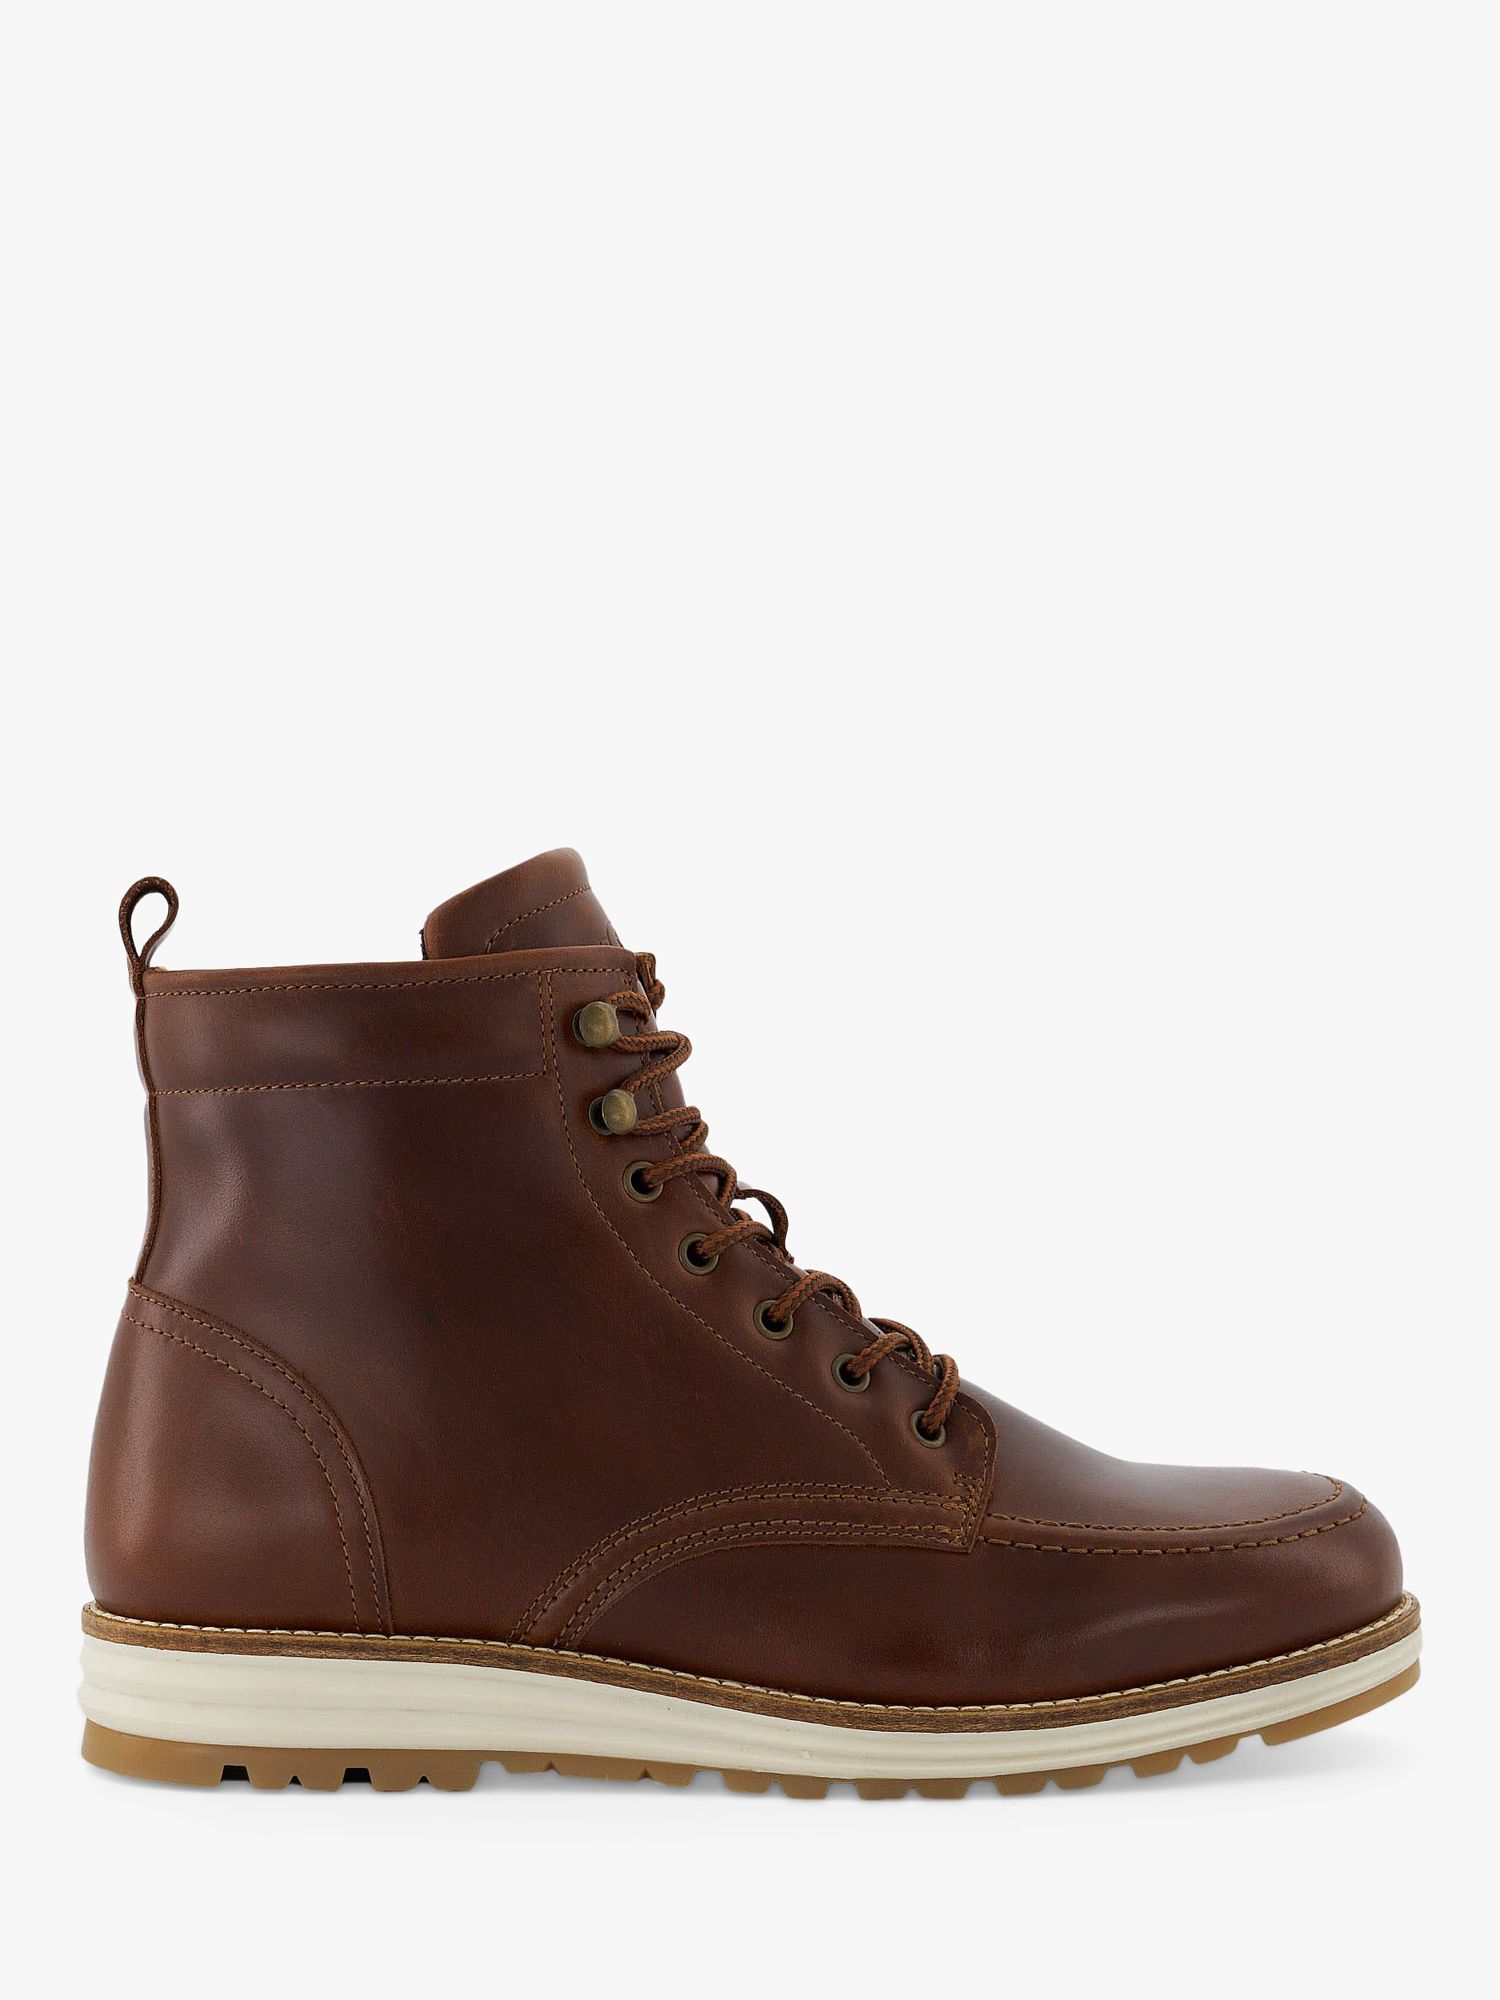 Dune Cranees Leather Lace Up Hiker Boots at John Lewis & Partners